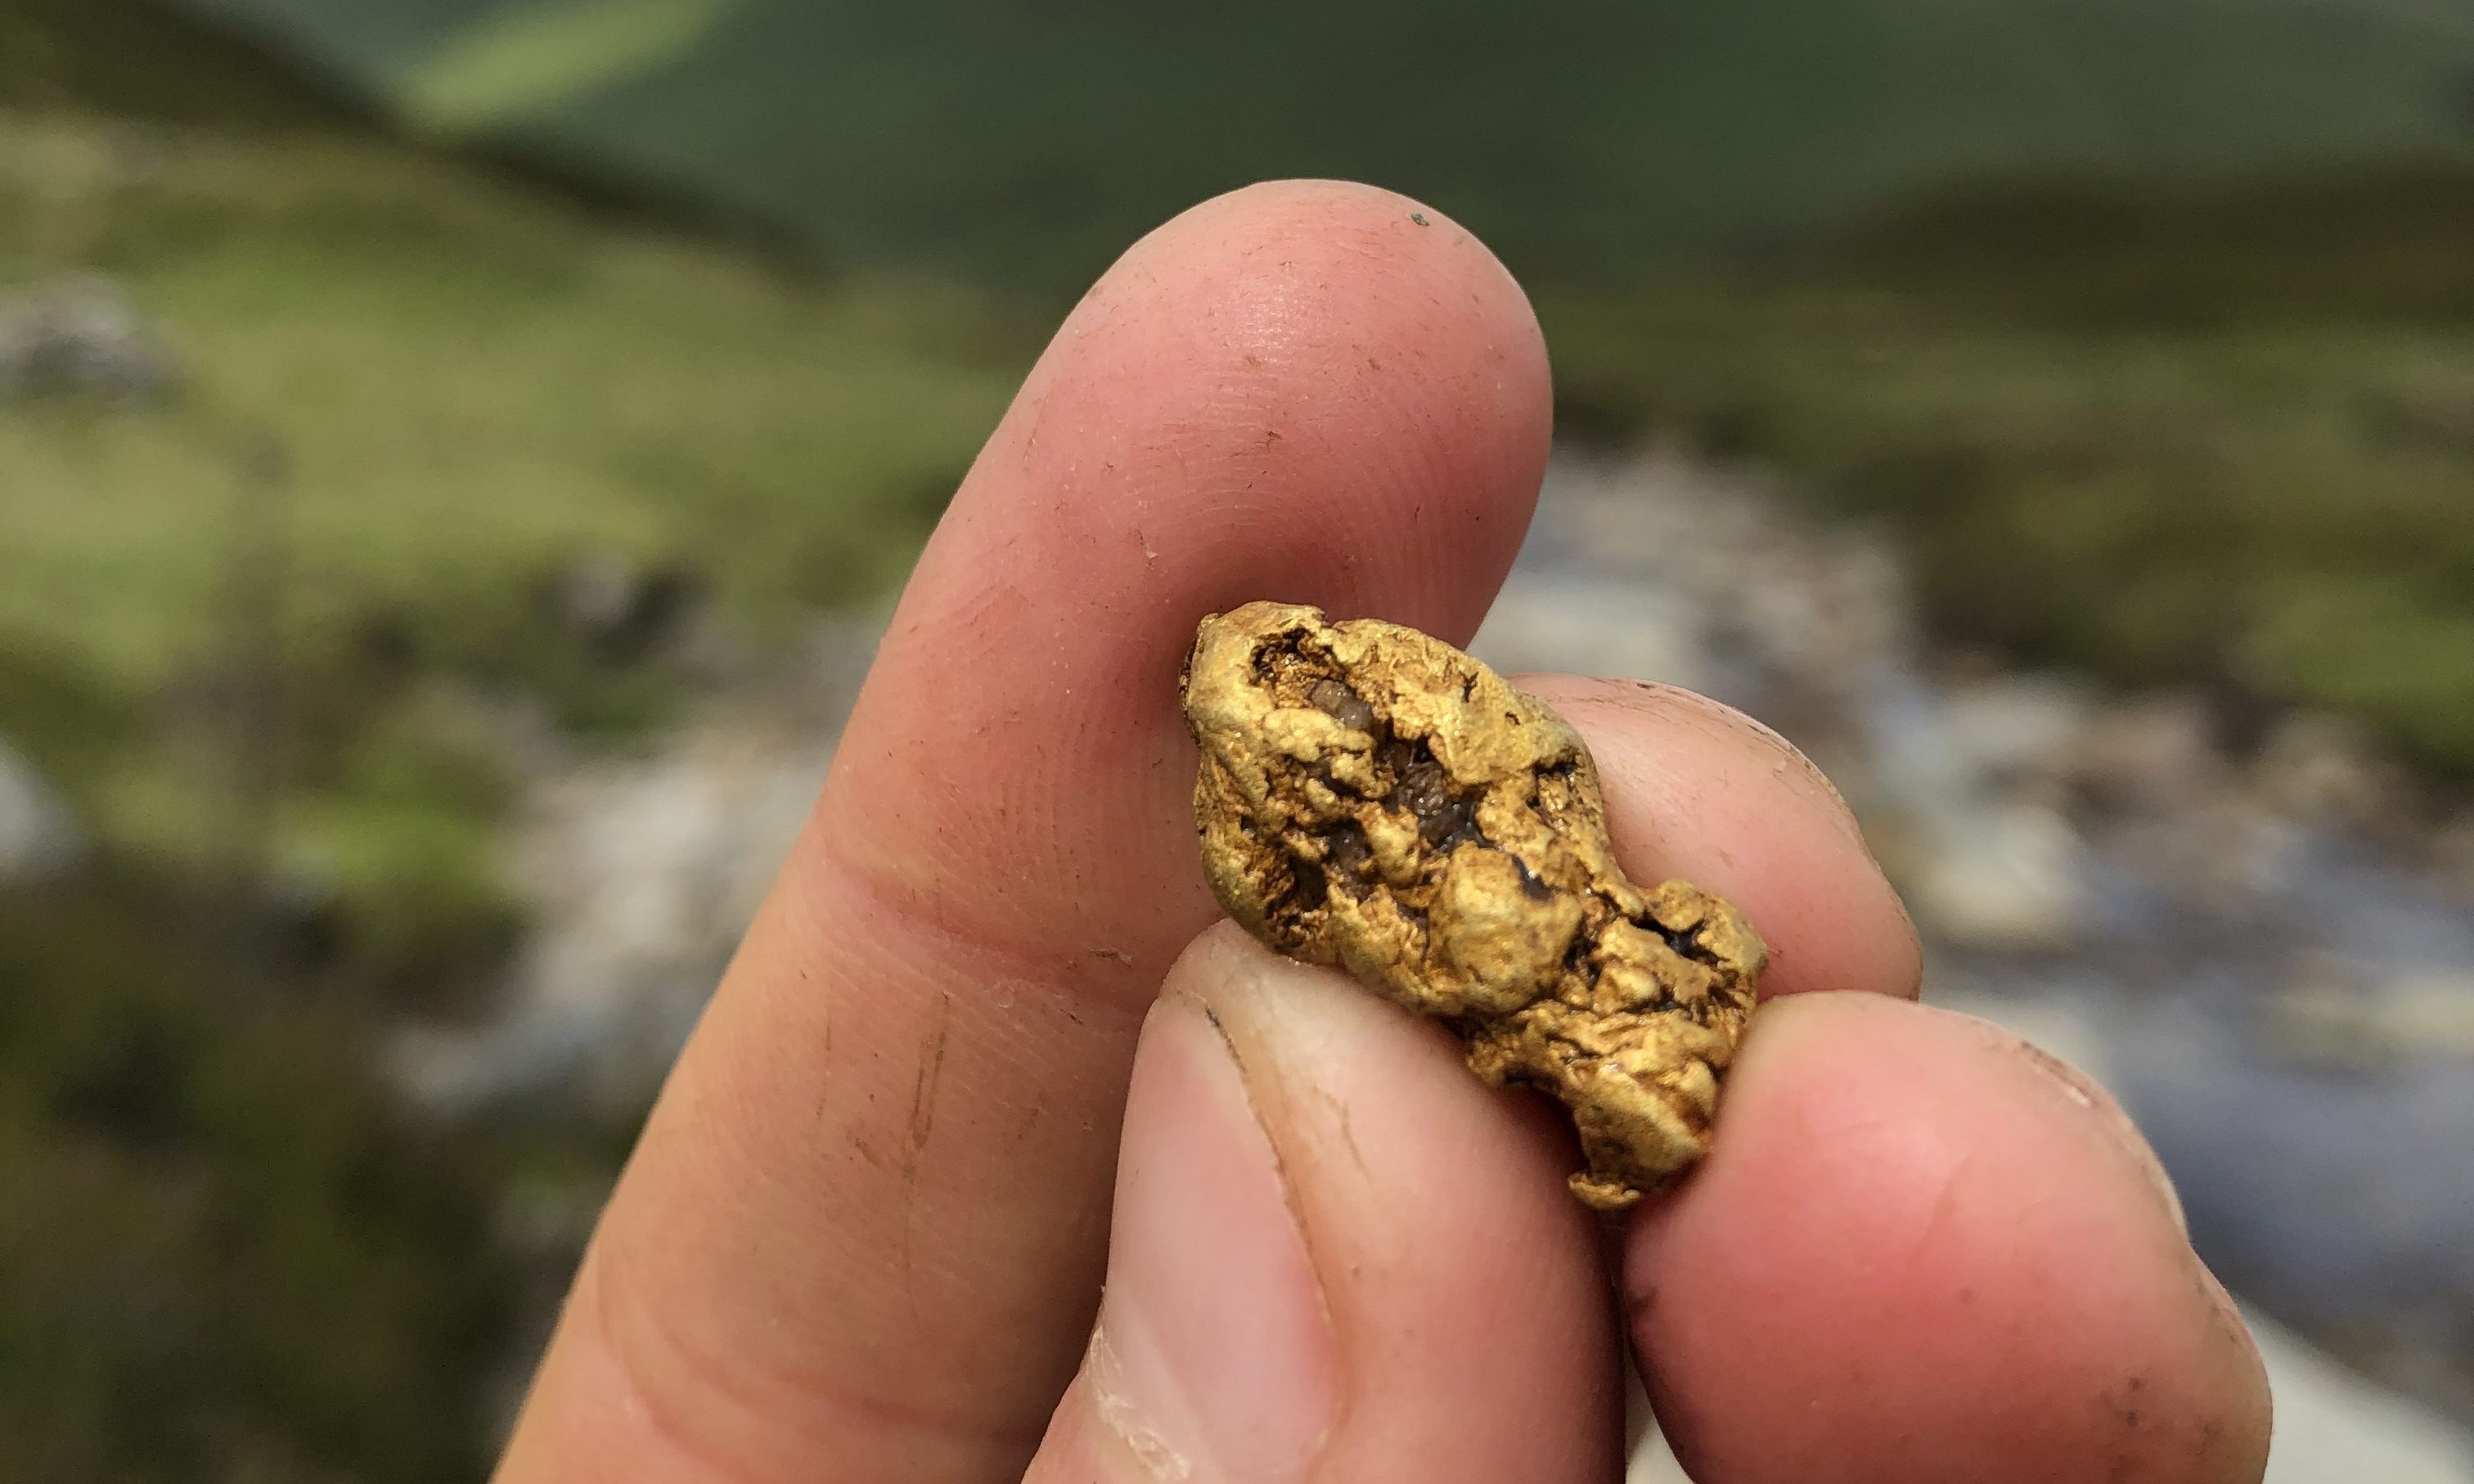 The 10 gram gold nugget found in July.